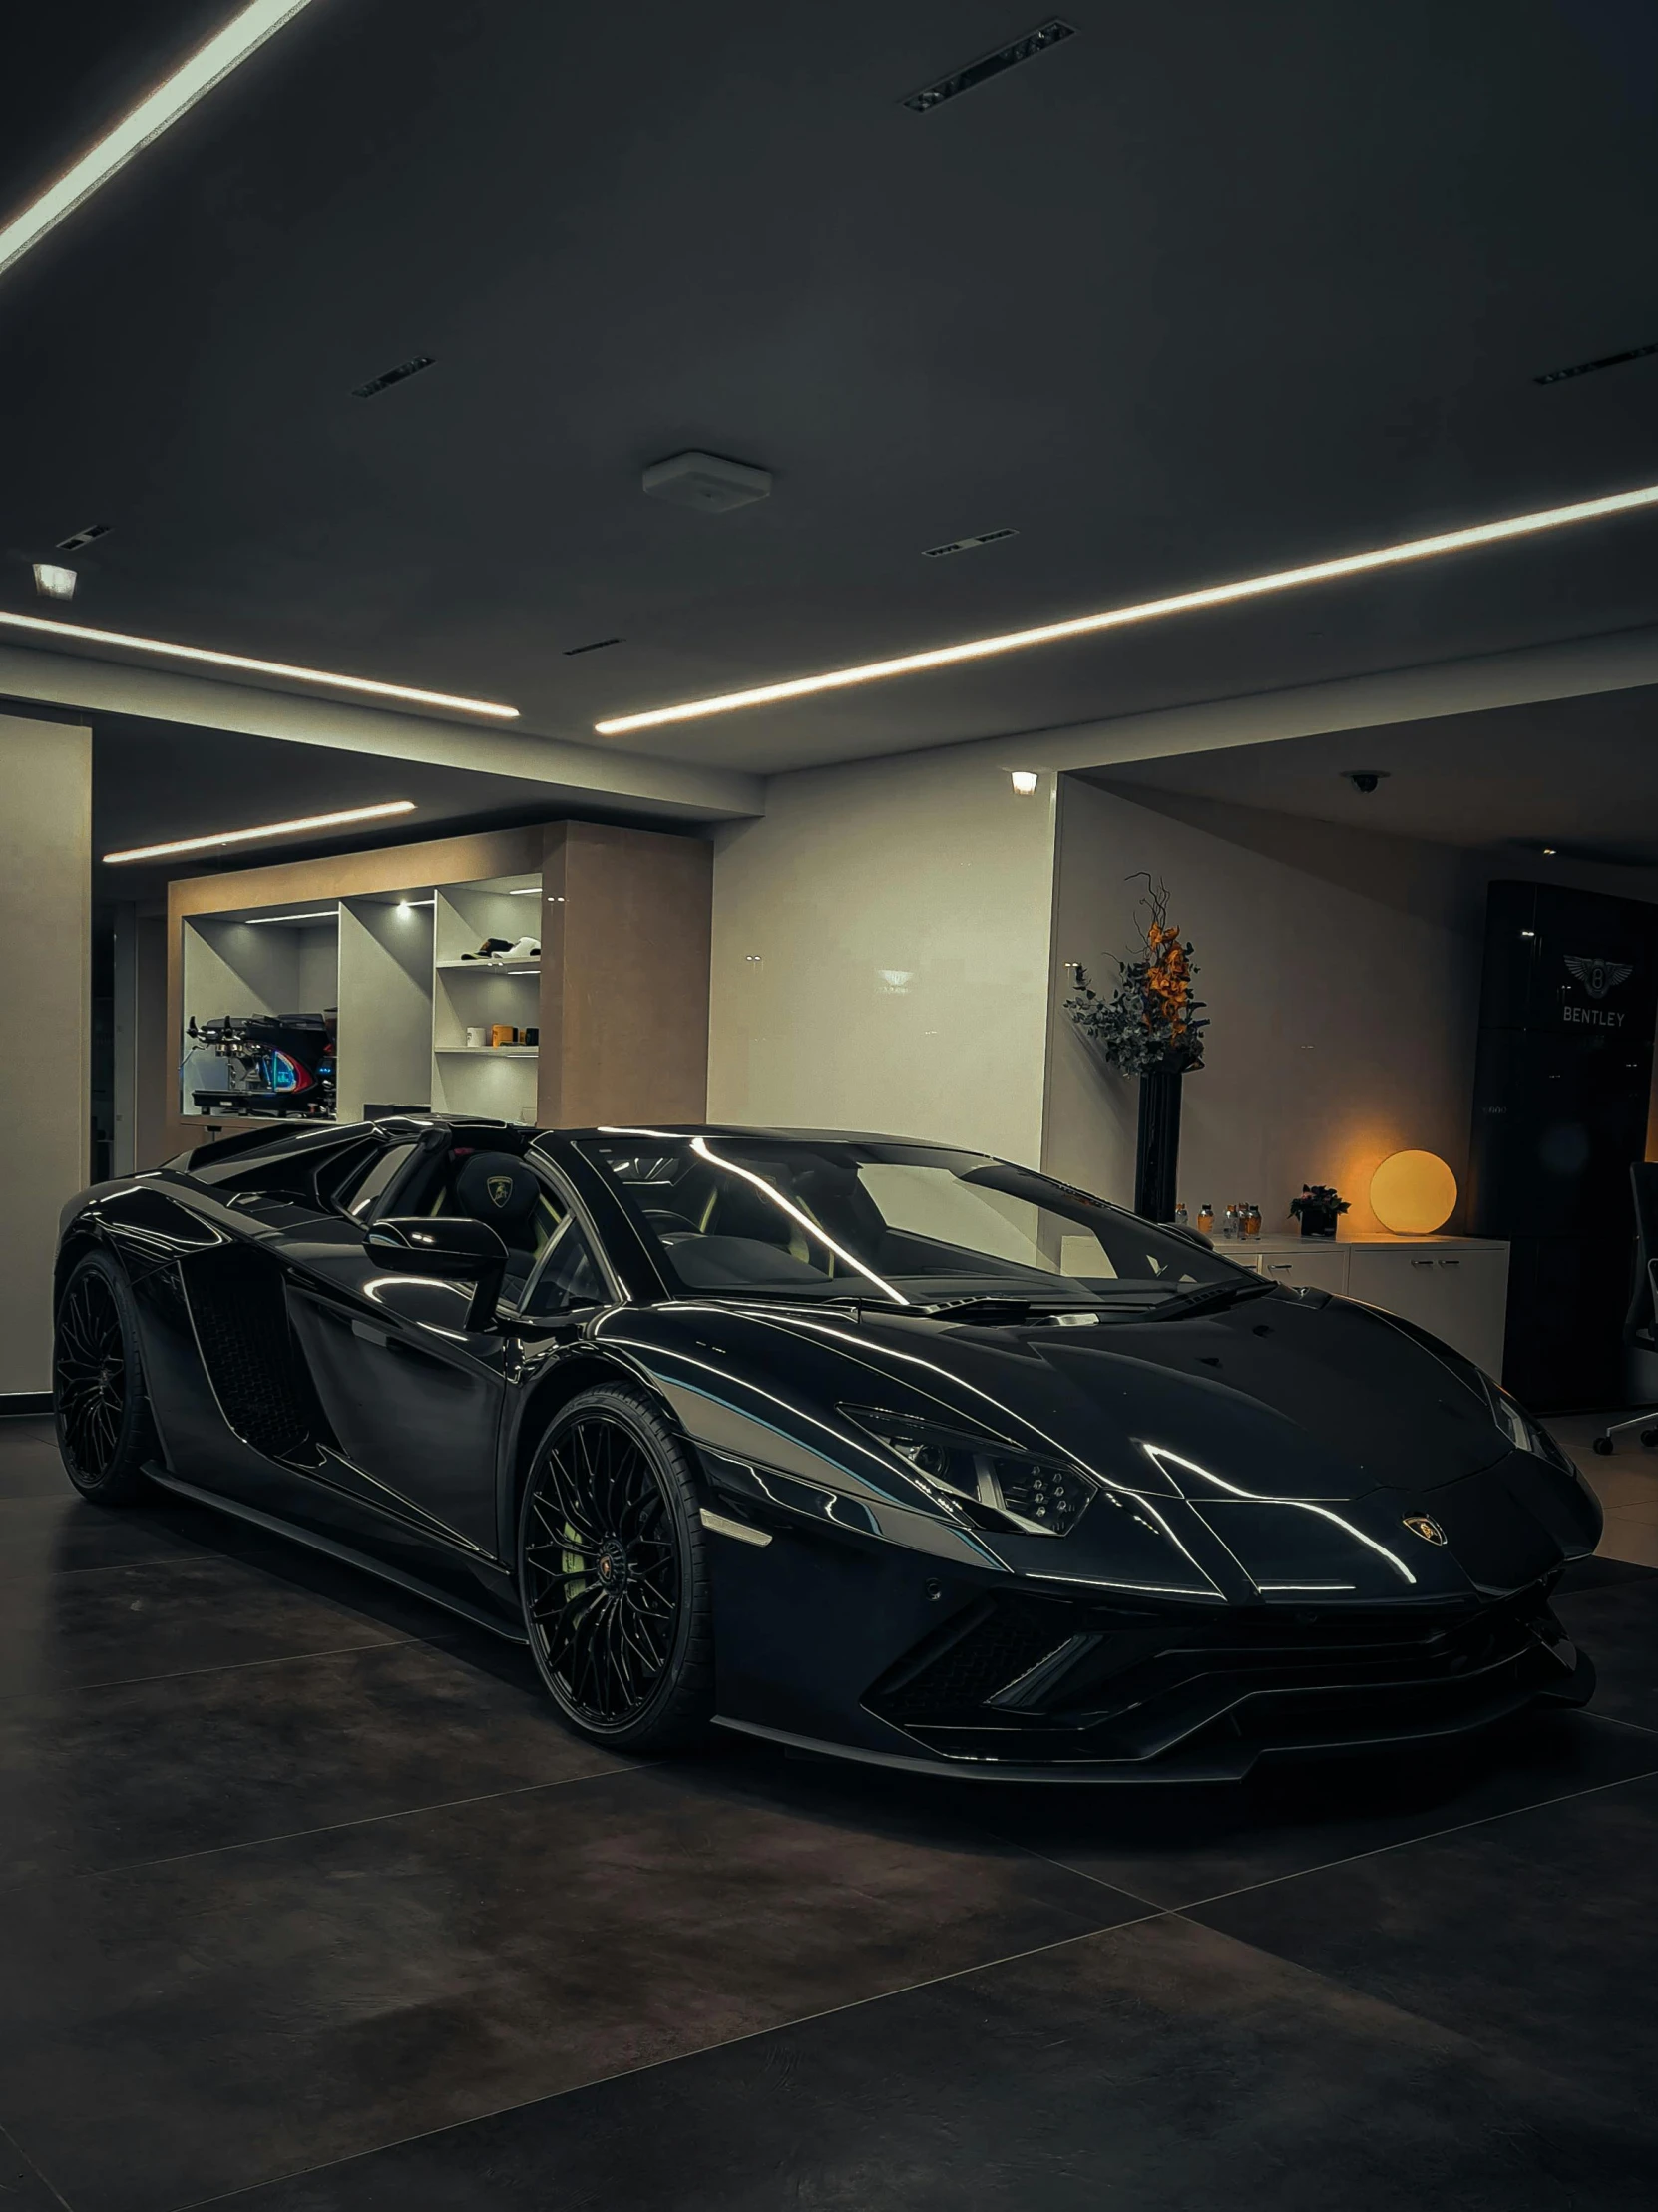 a black, sleek car parked in a room